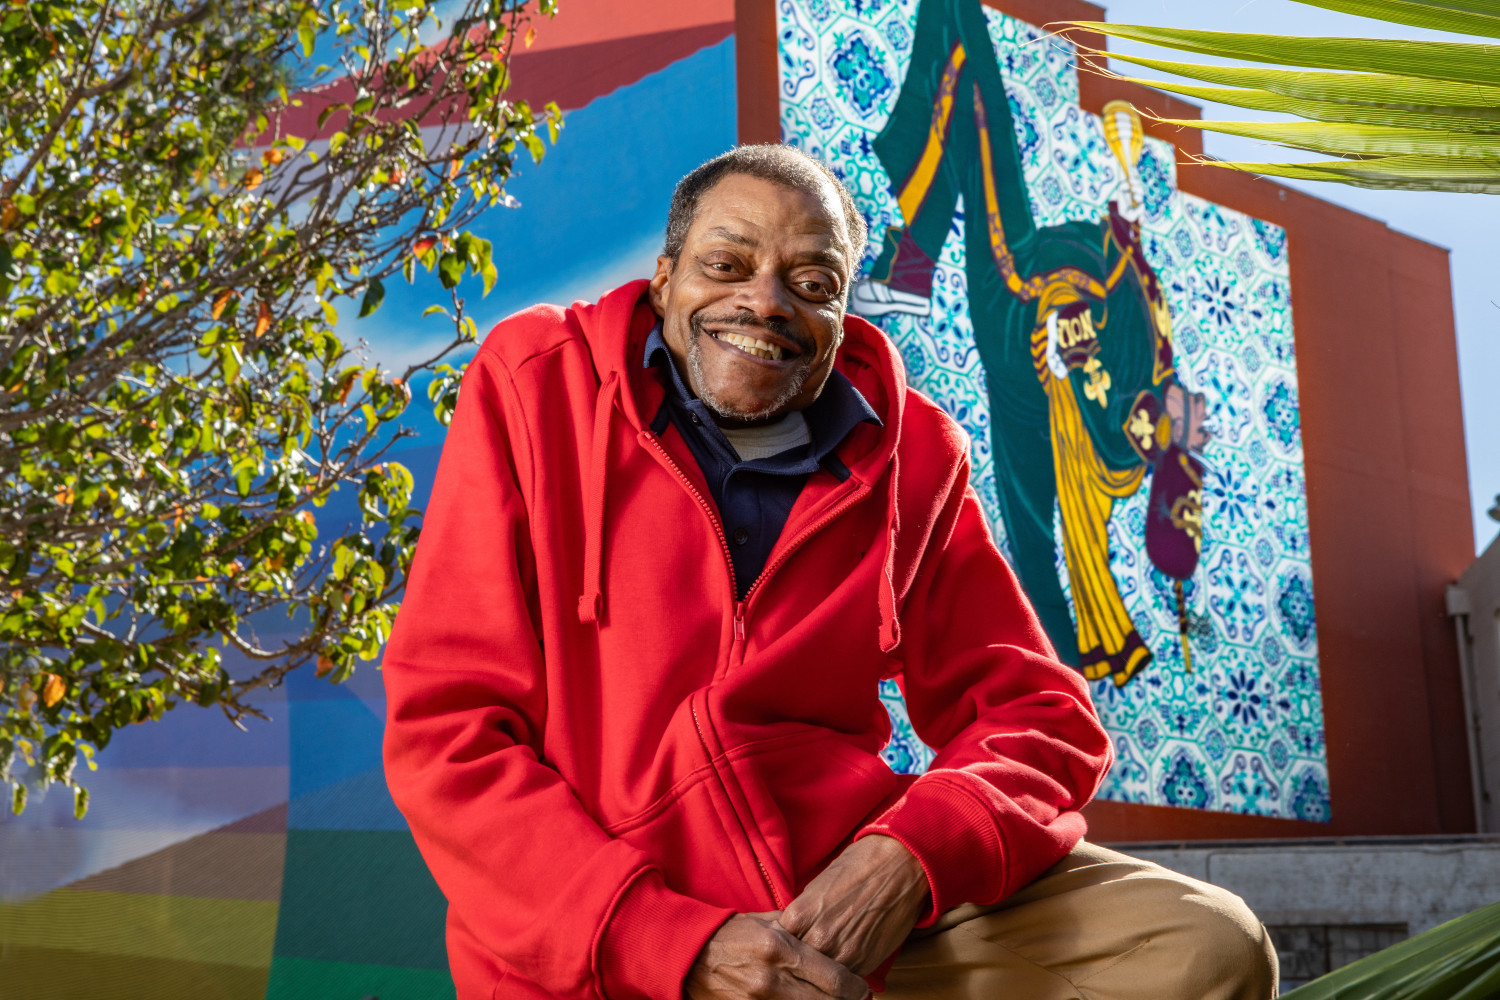 Artist Keith Duncan stands in front of his &amp;quot;Drum Major of NOLA&amp;quot; mural at The Ogden Museum of Southern Art.
Photo by: Crista Rock